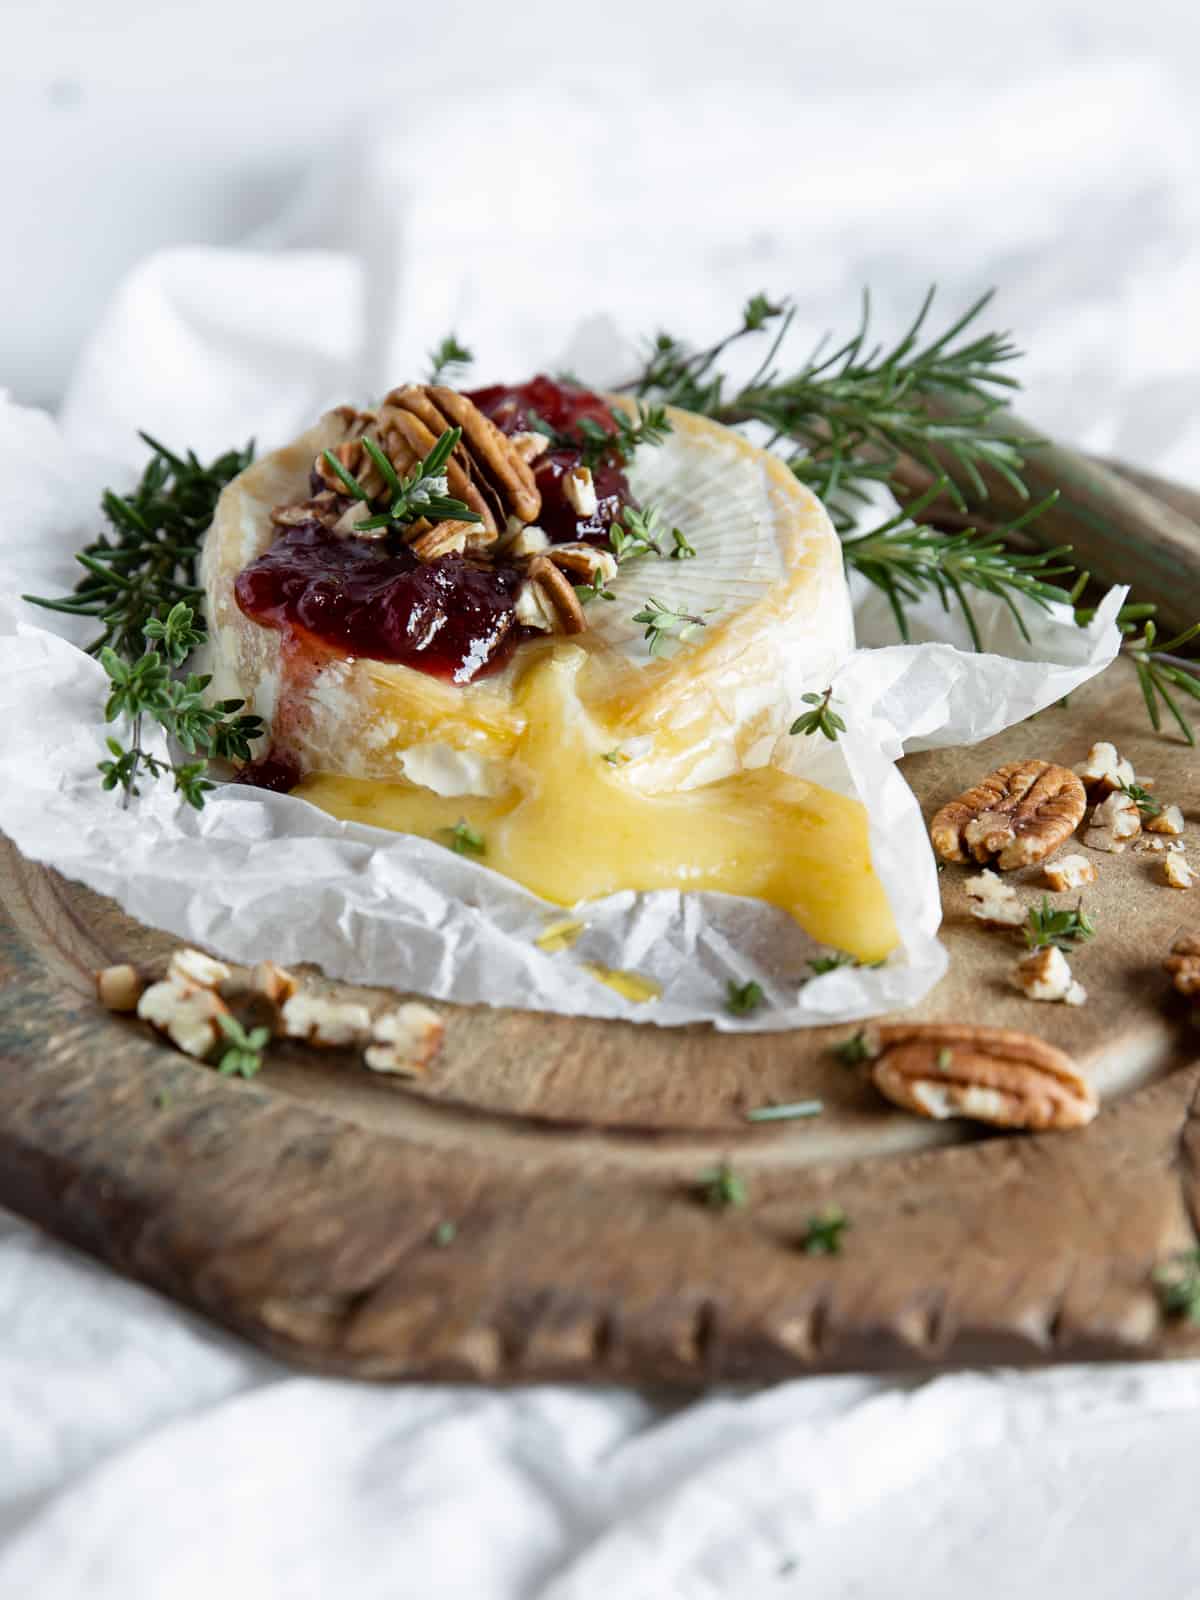 baked brie with cranberry sauce and pecans, garnished with fresh herbs and served with crackers